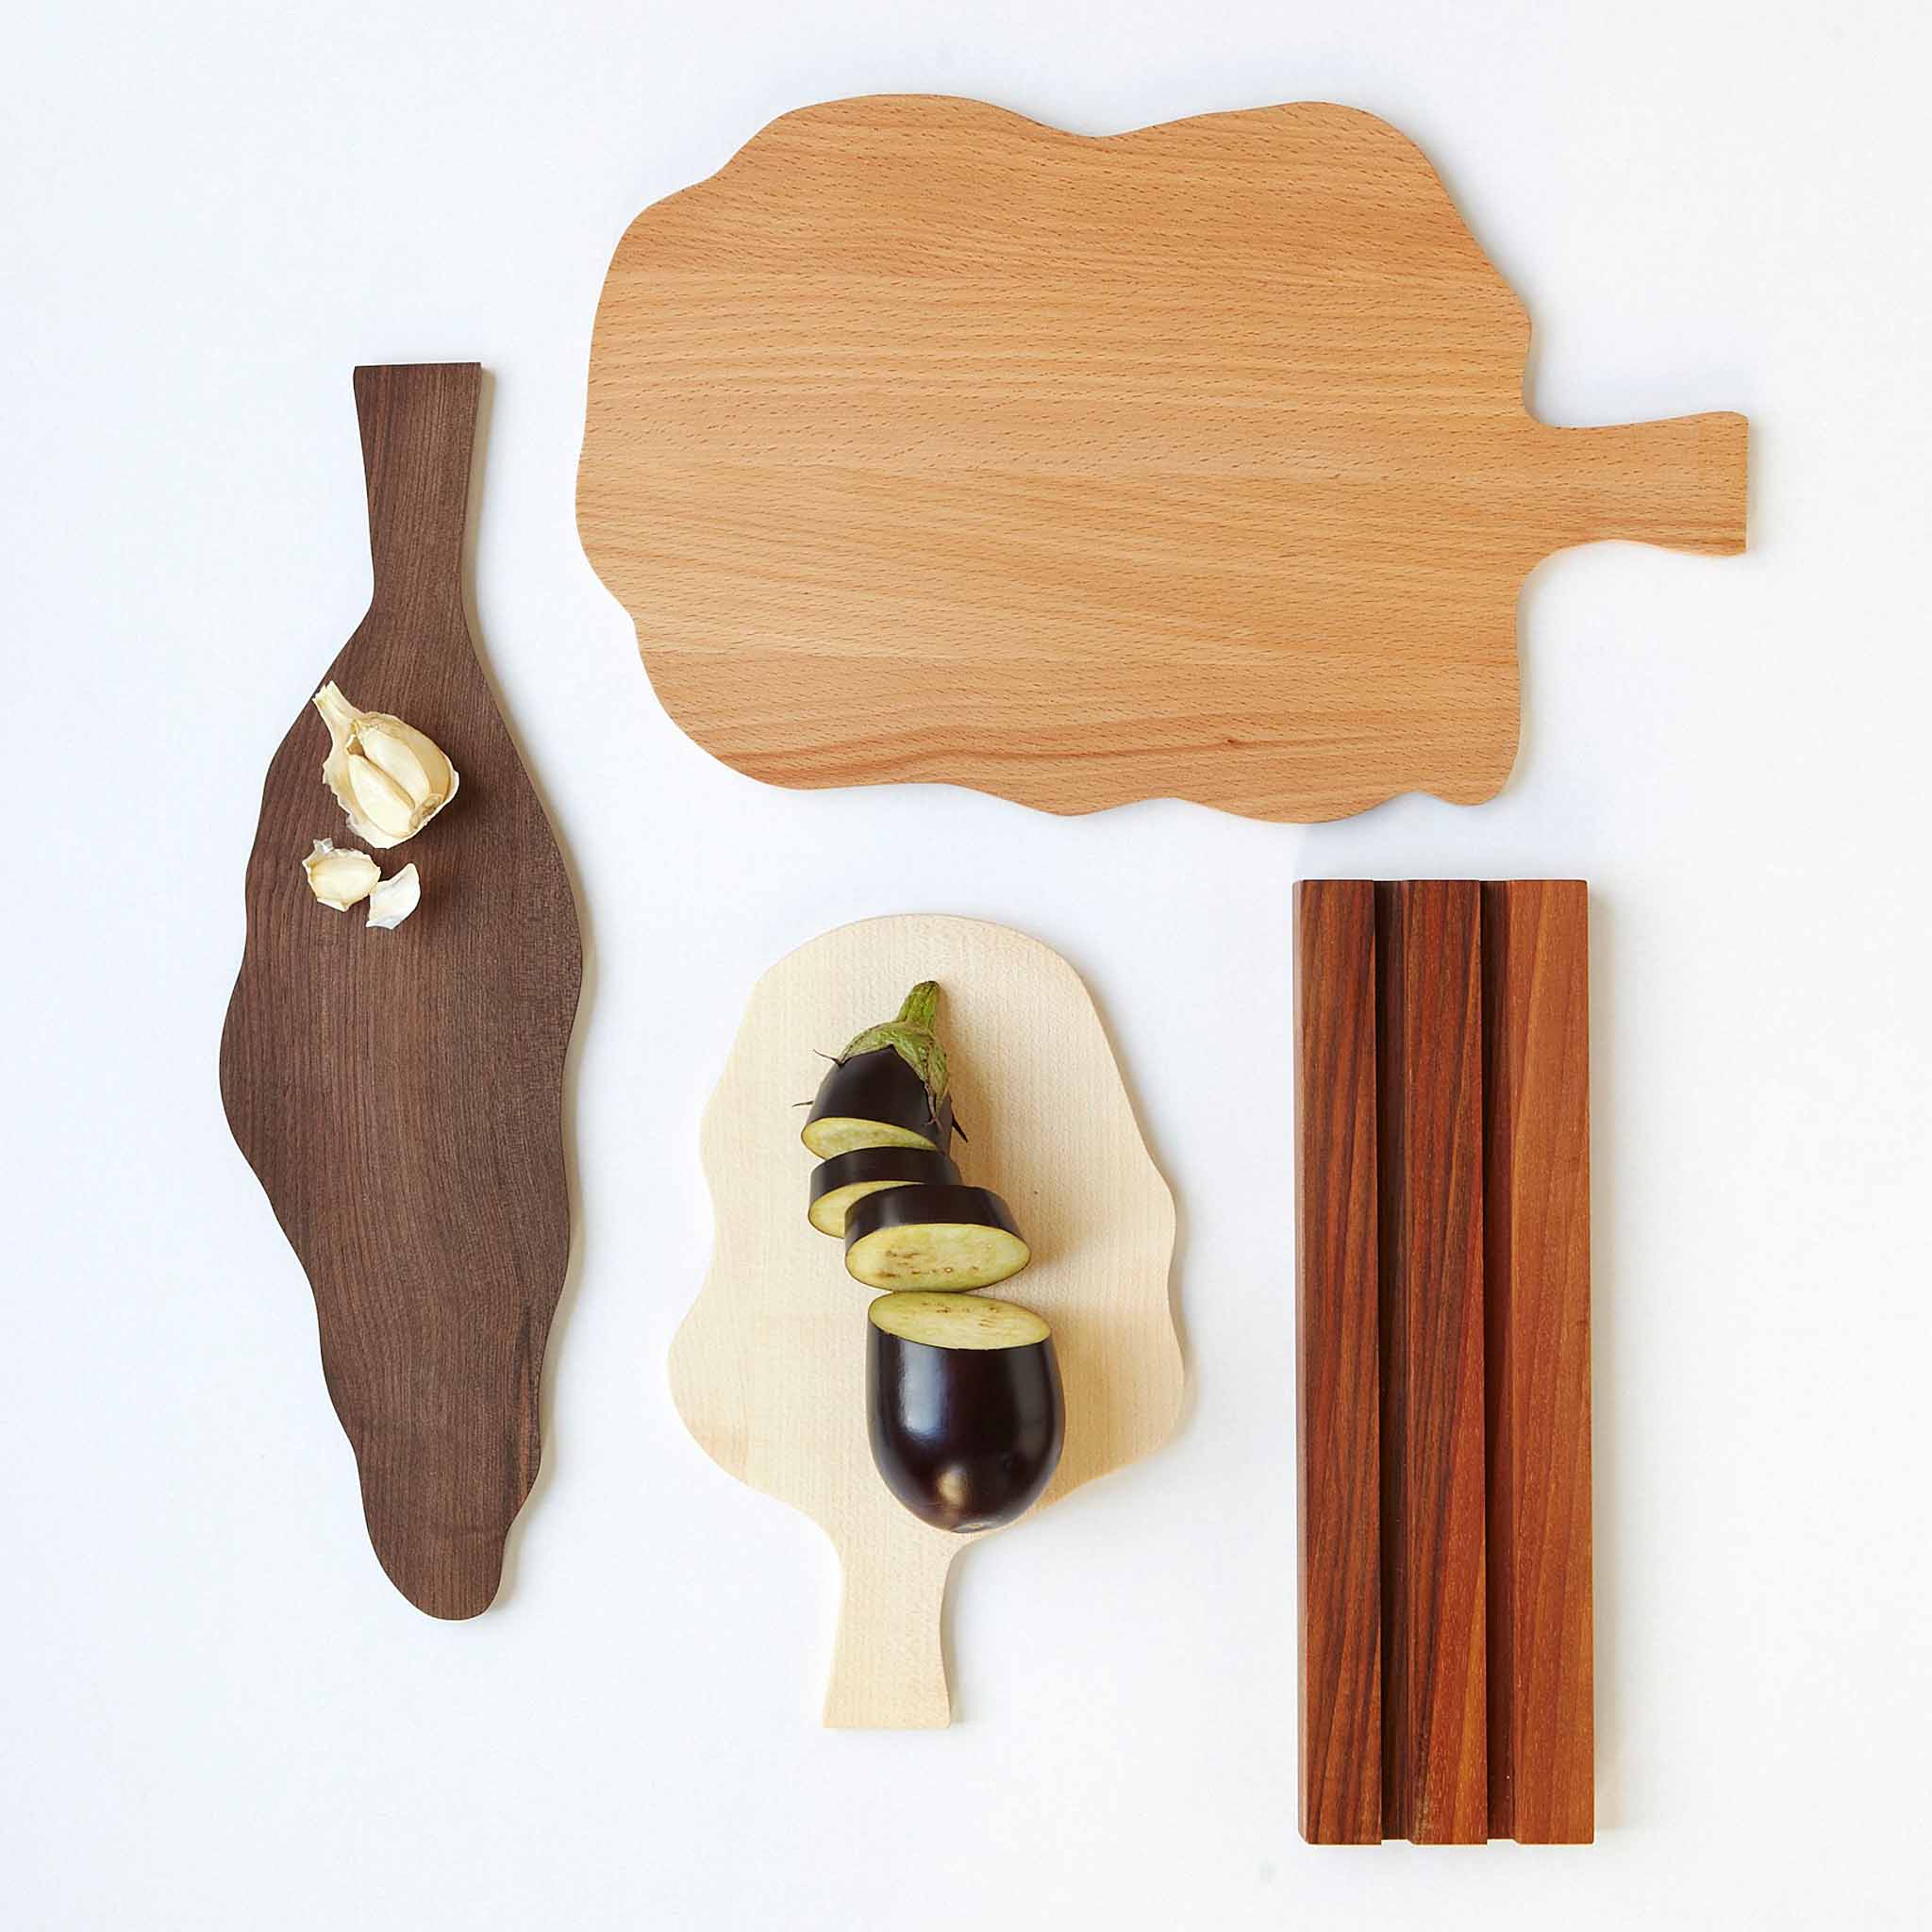 Forest Serving Board set by Fidea Design. A forest for your kitchen. Each of the three cutting board is made of a different wood - maple, beech and walnut - and comes in a different shape and size. 